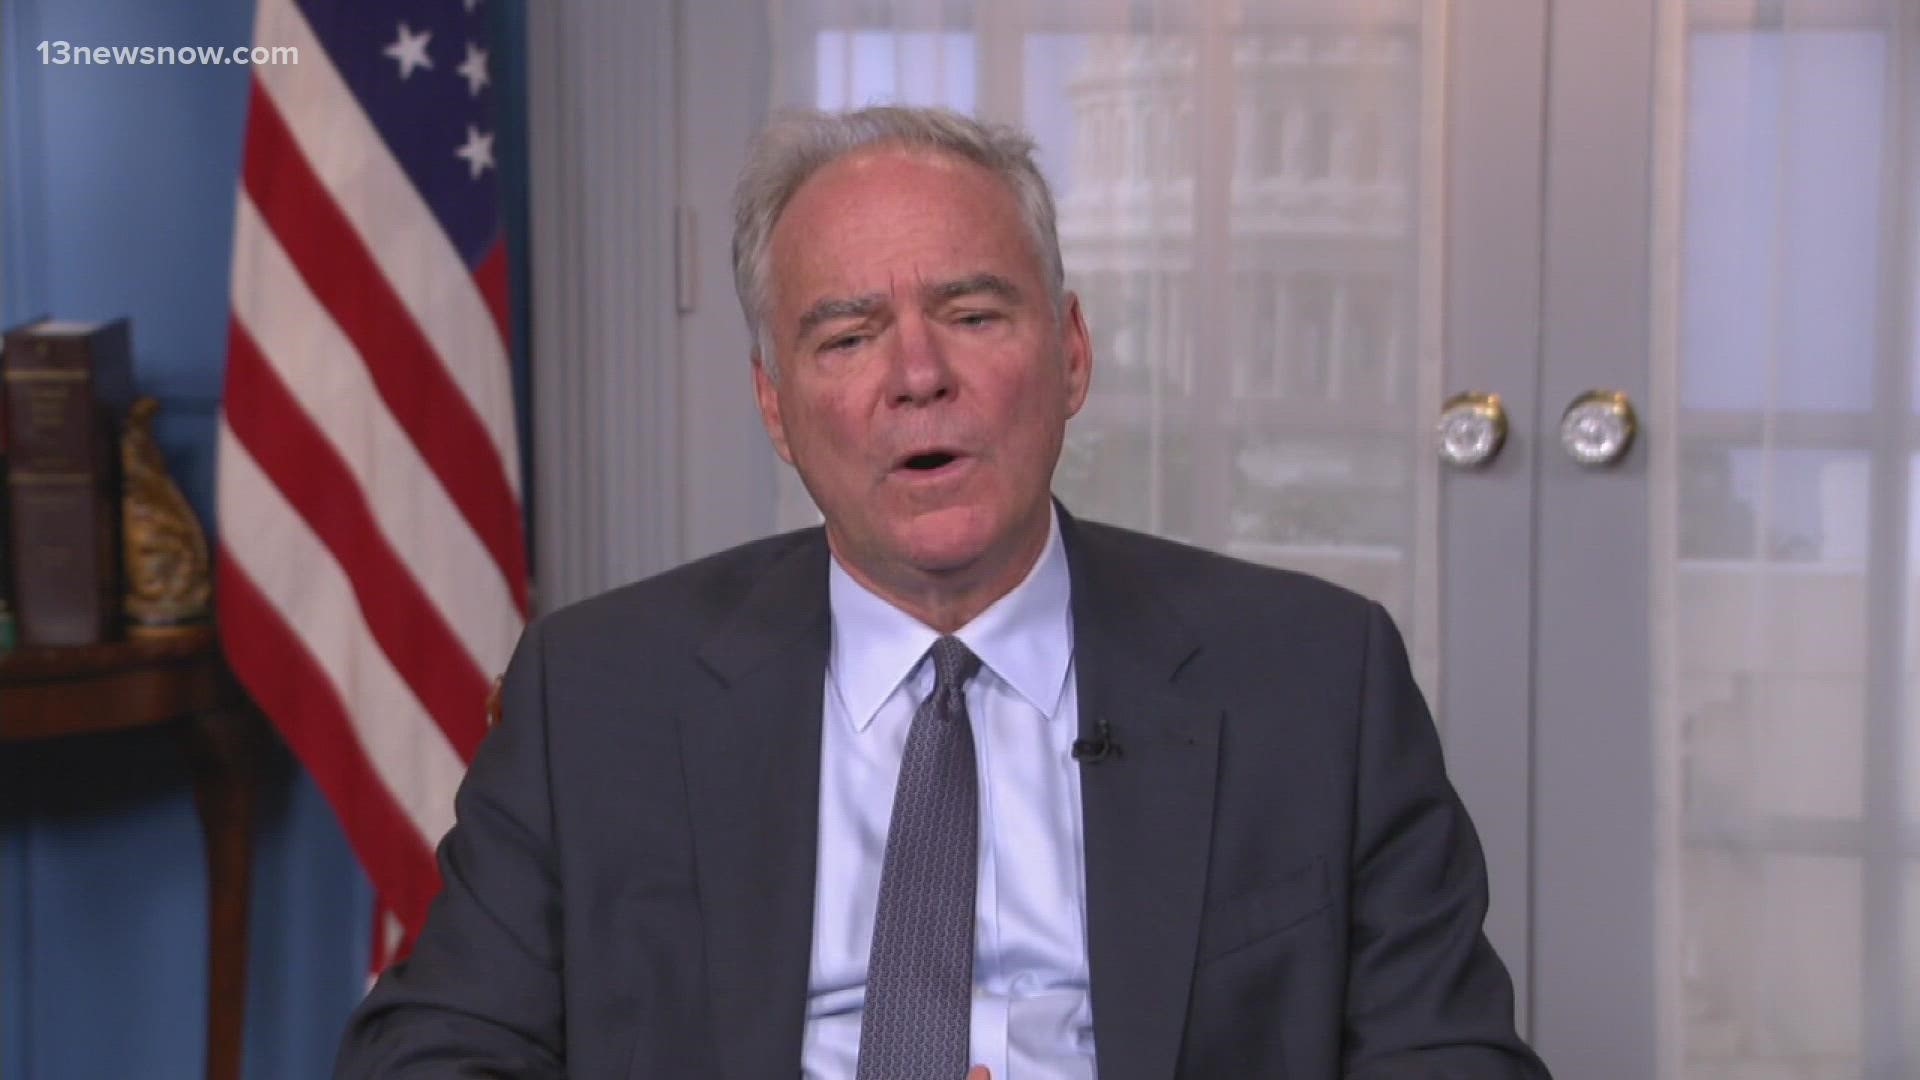 Kaine is optimistic that Congress can pass a temporary continuing resolution to keep the government open.